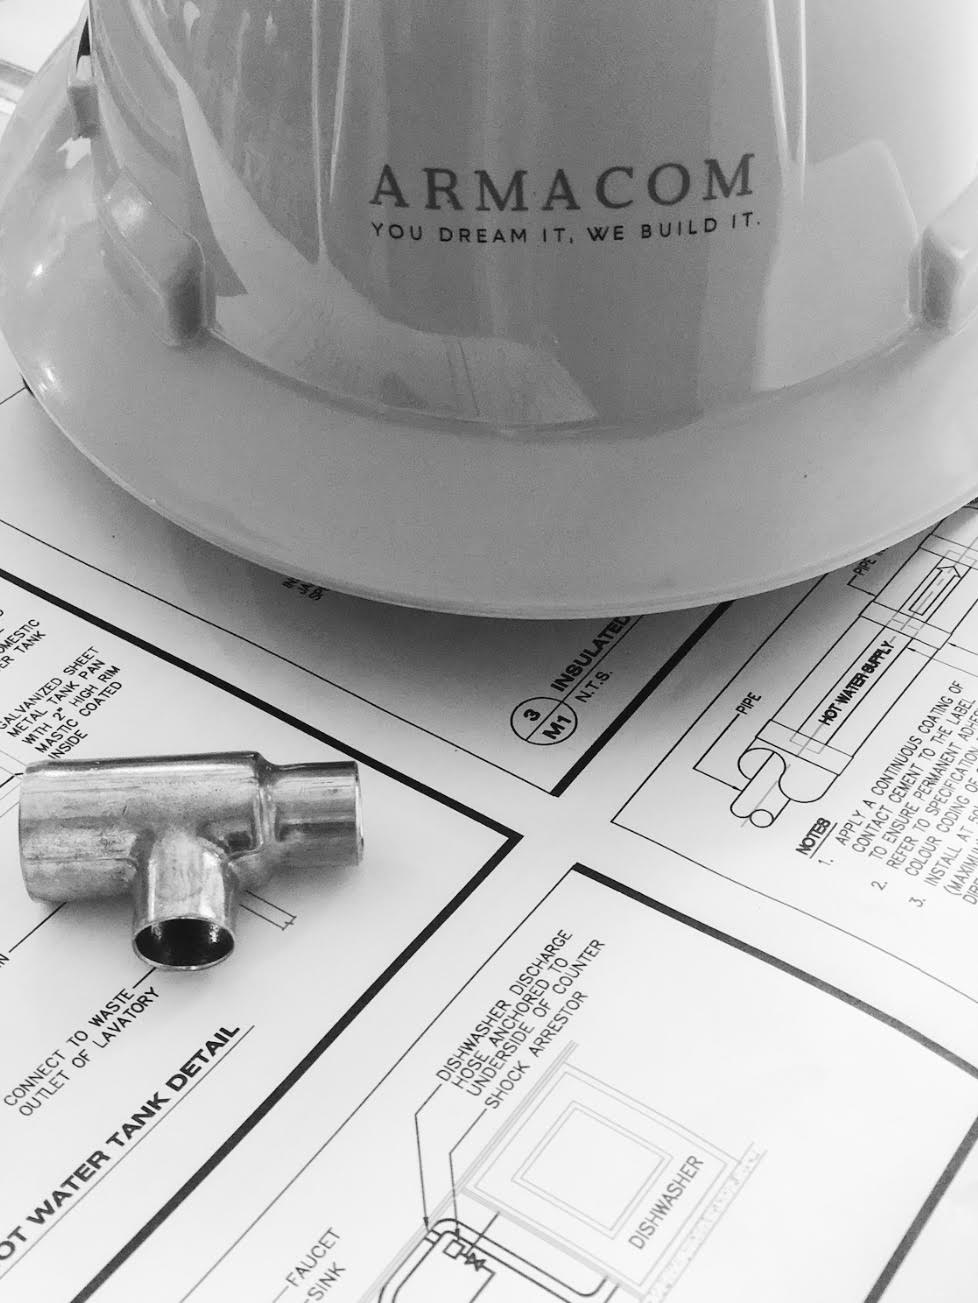 Armacom Hard hat with plans underneath